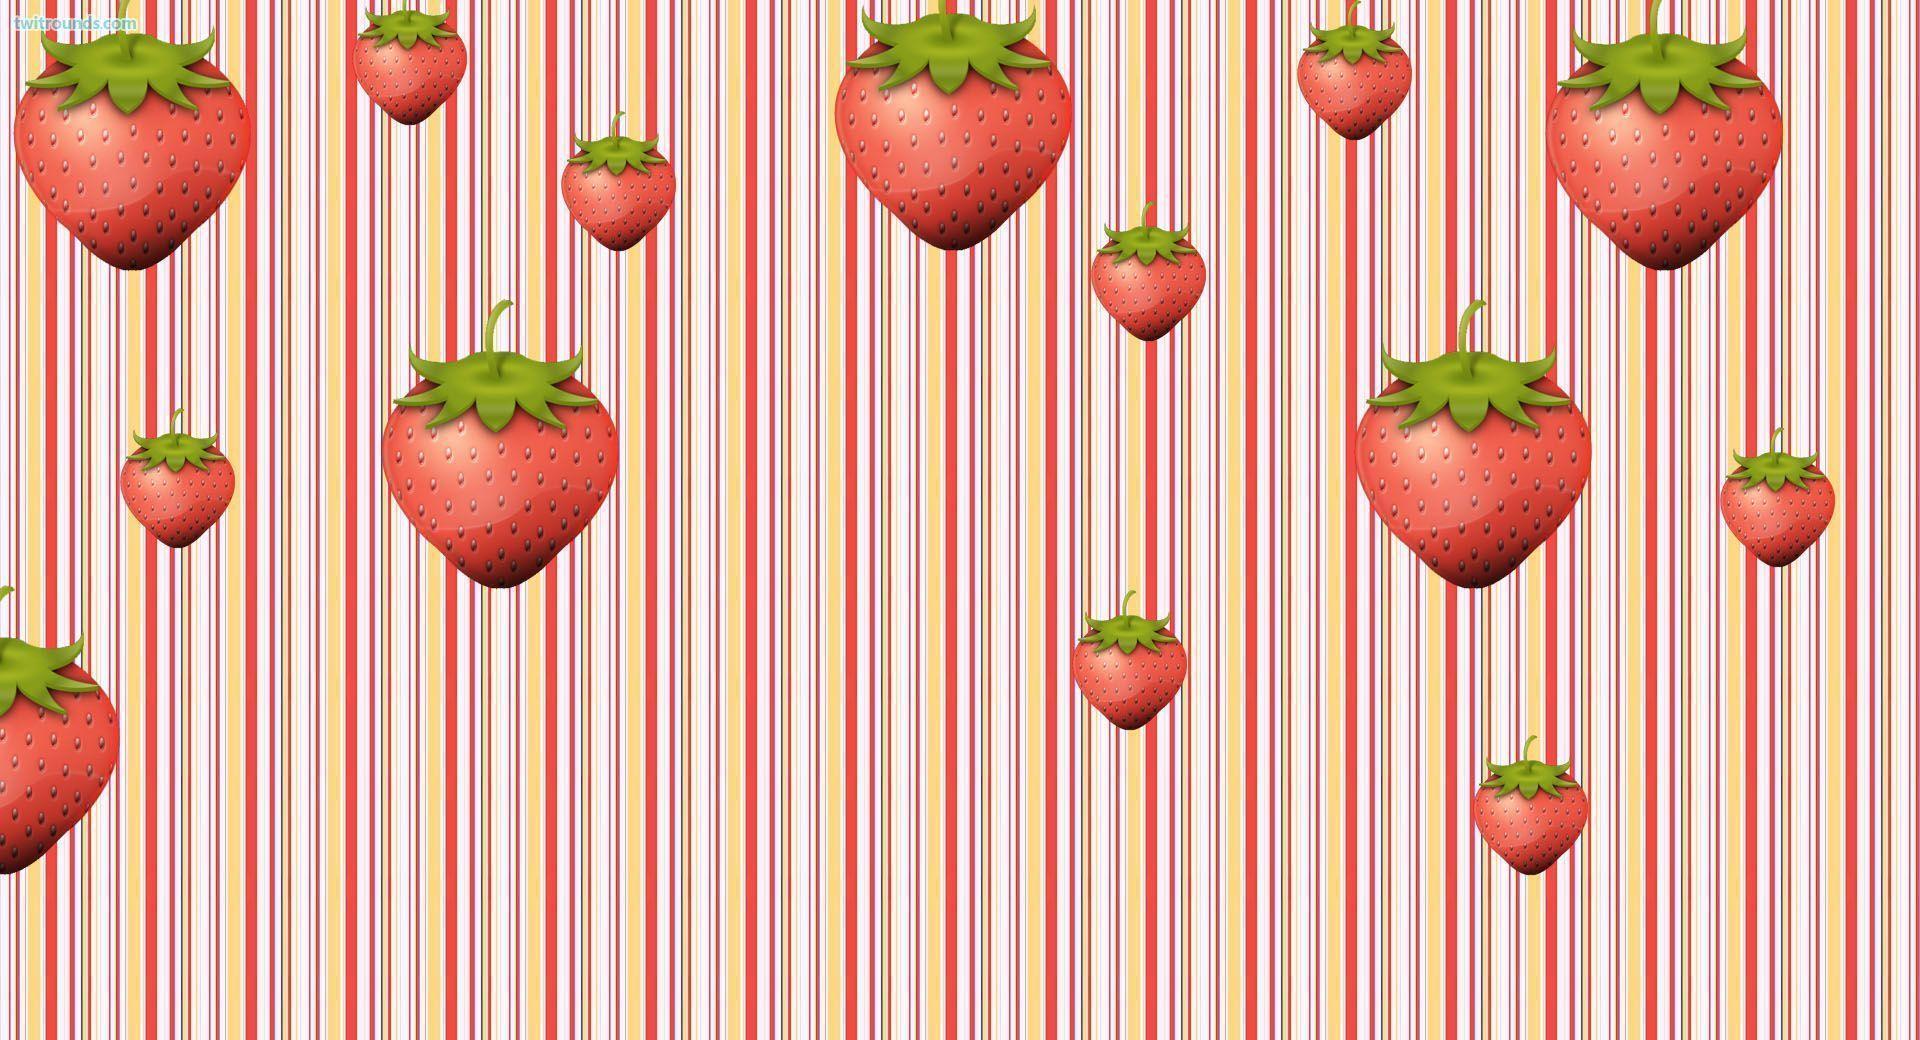 Strawberry Facebook Cover - HD Wallpaper 